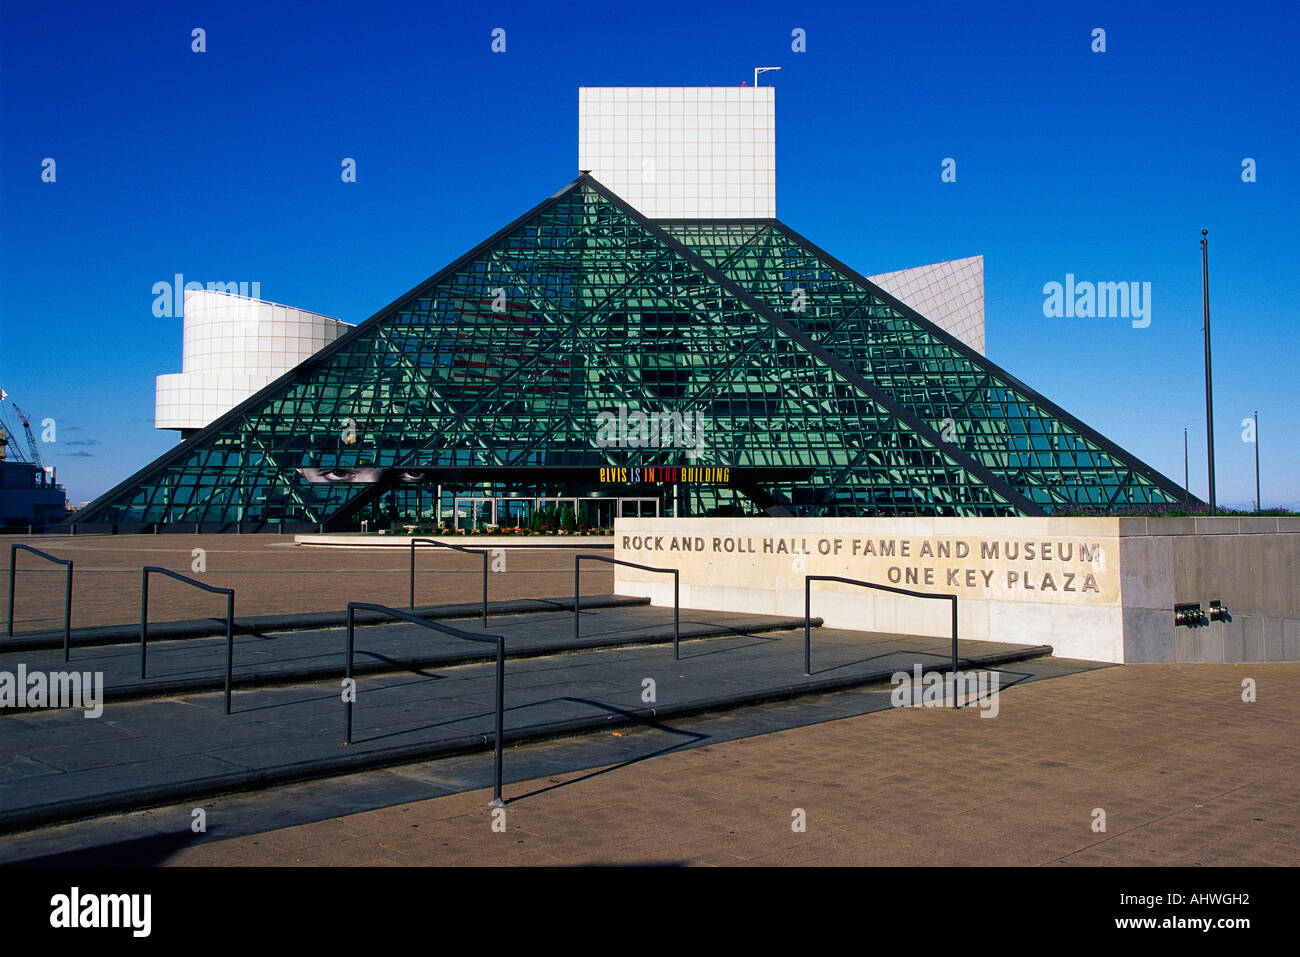 This is the Rock Roll Hall of Fame and Museum at One Key Plaza It shows the glass pyramid architecture Stock Photo